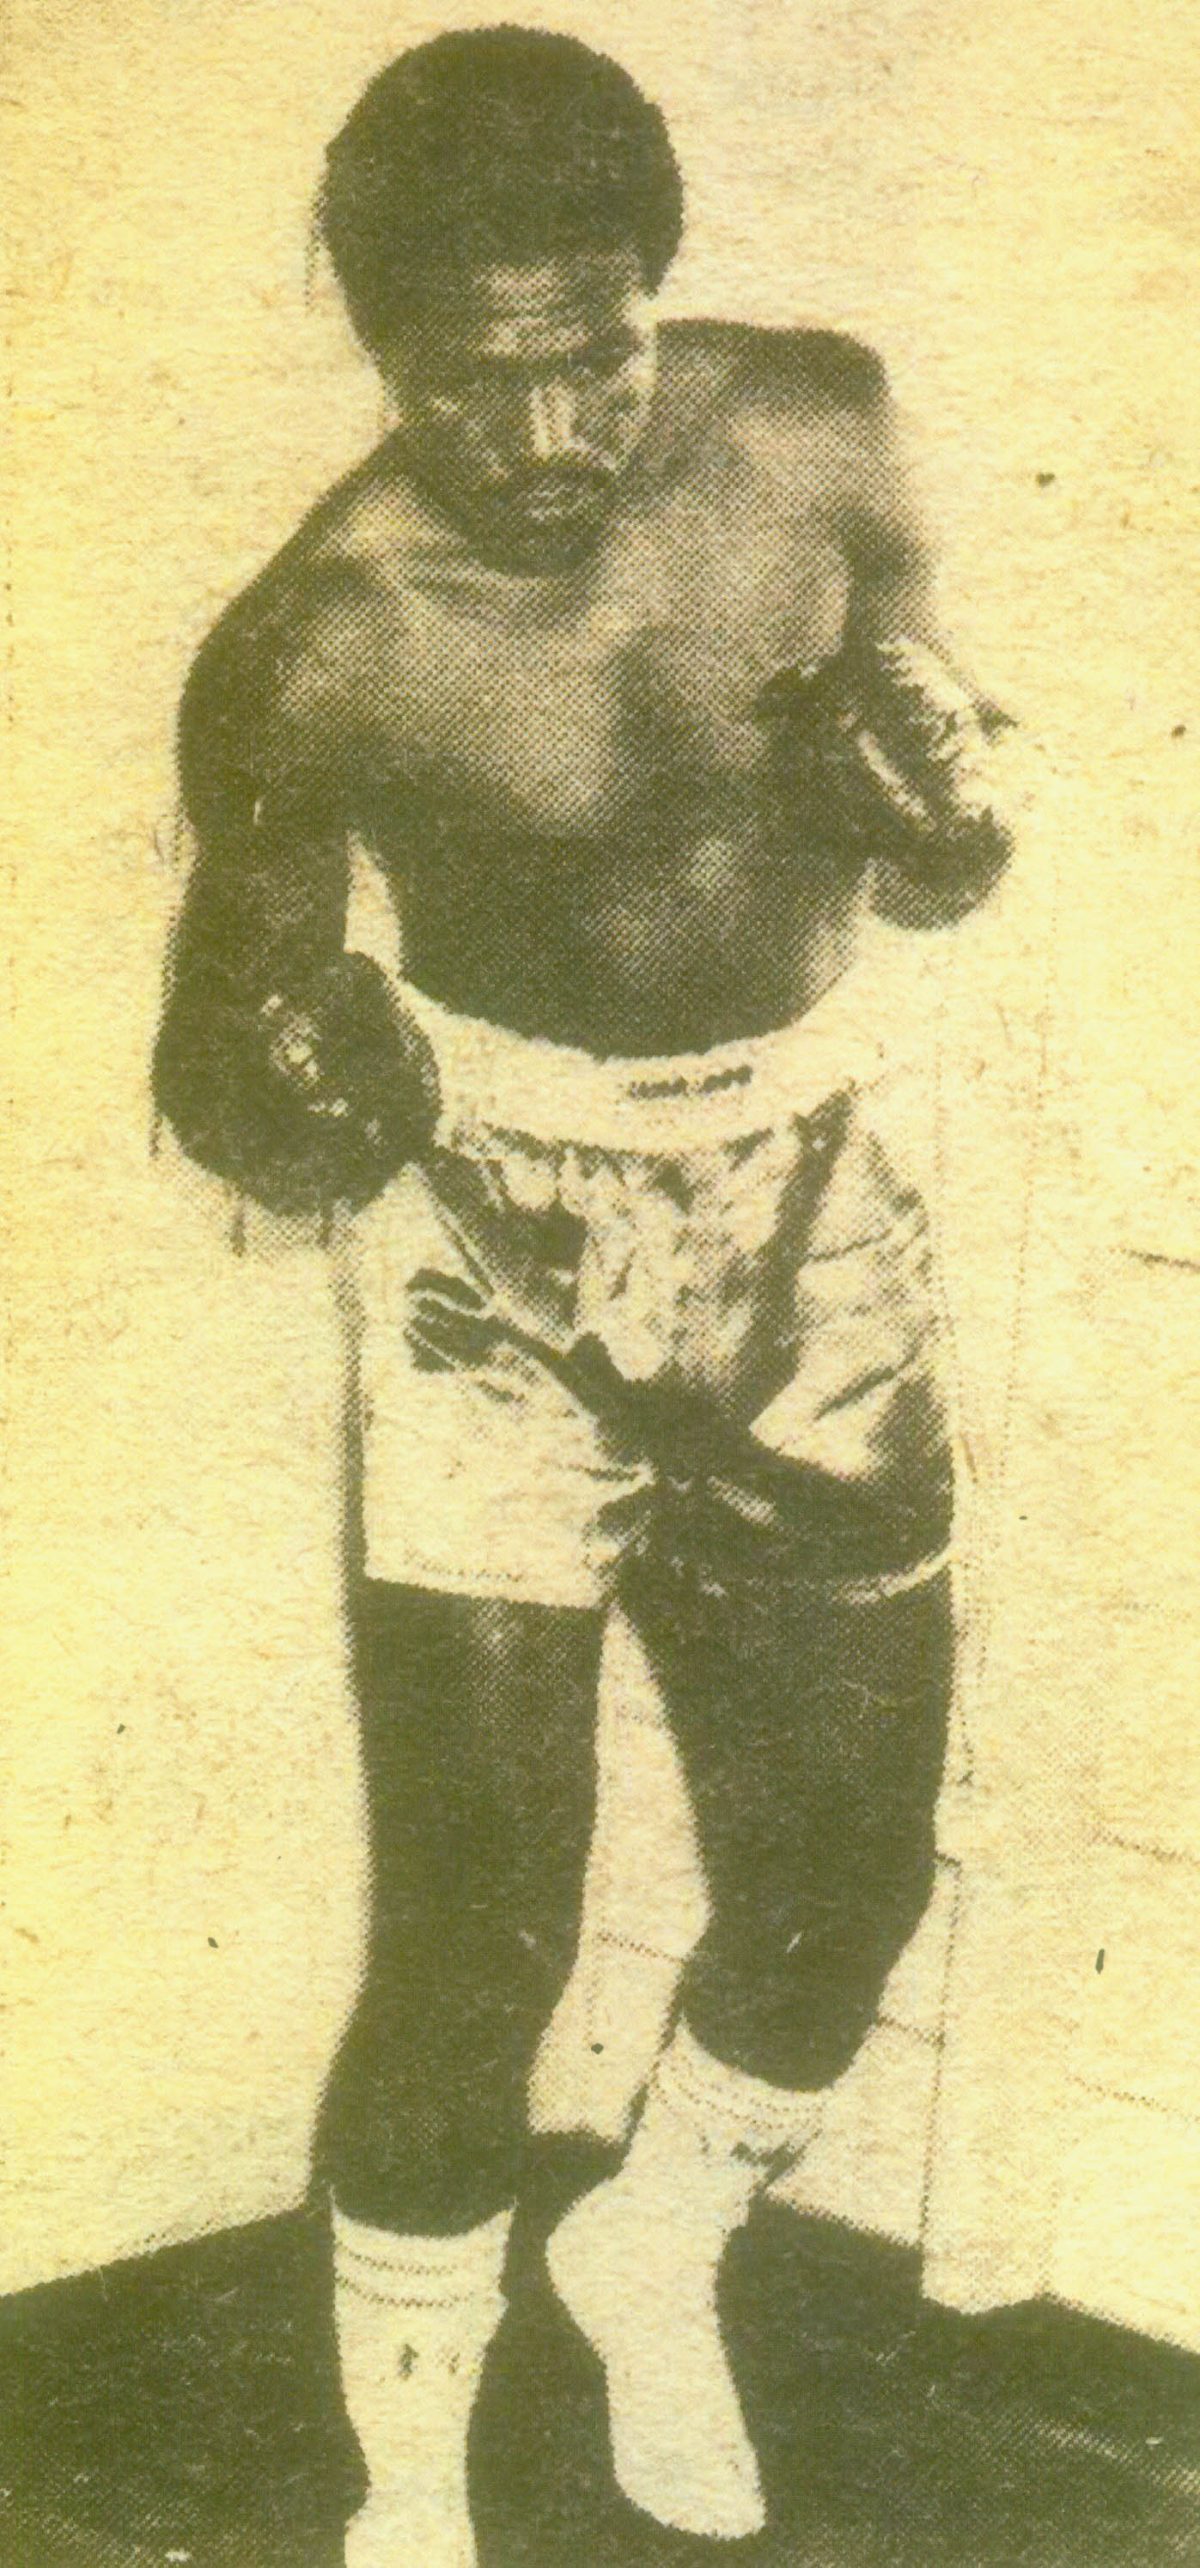 Guyana’s Lennox Blackmore was one of the finest counterpunches of his era and also one of the greatest fighters ever born in this country.
